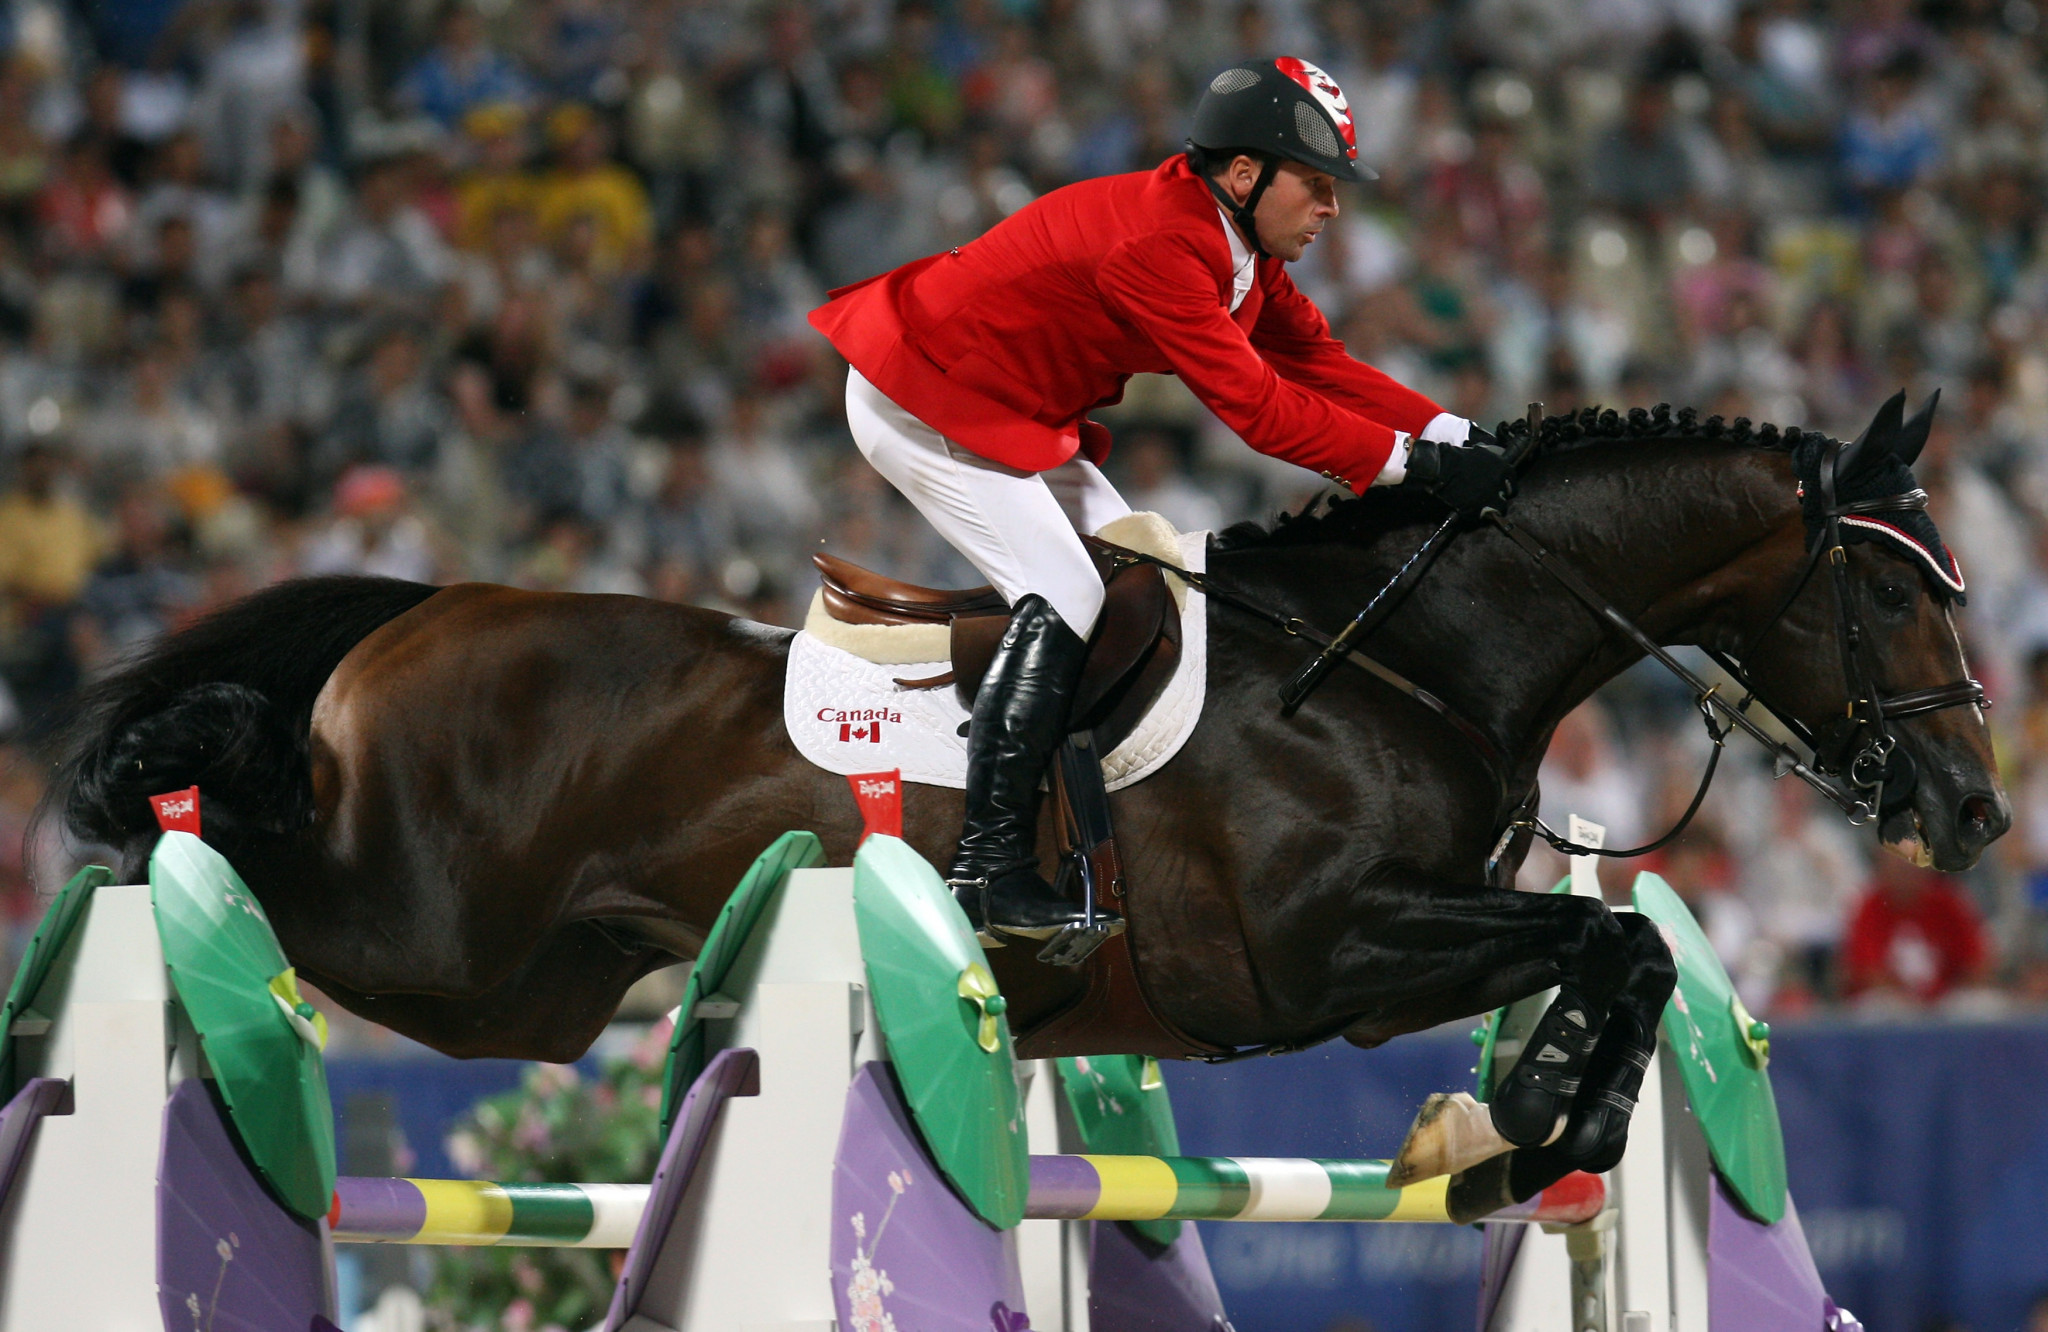 Triple Olympic equestrian medallist Lamaze suspended for four years over fabrication of medical documents